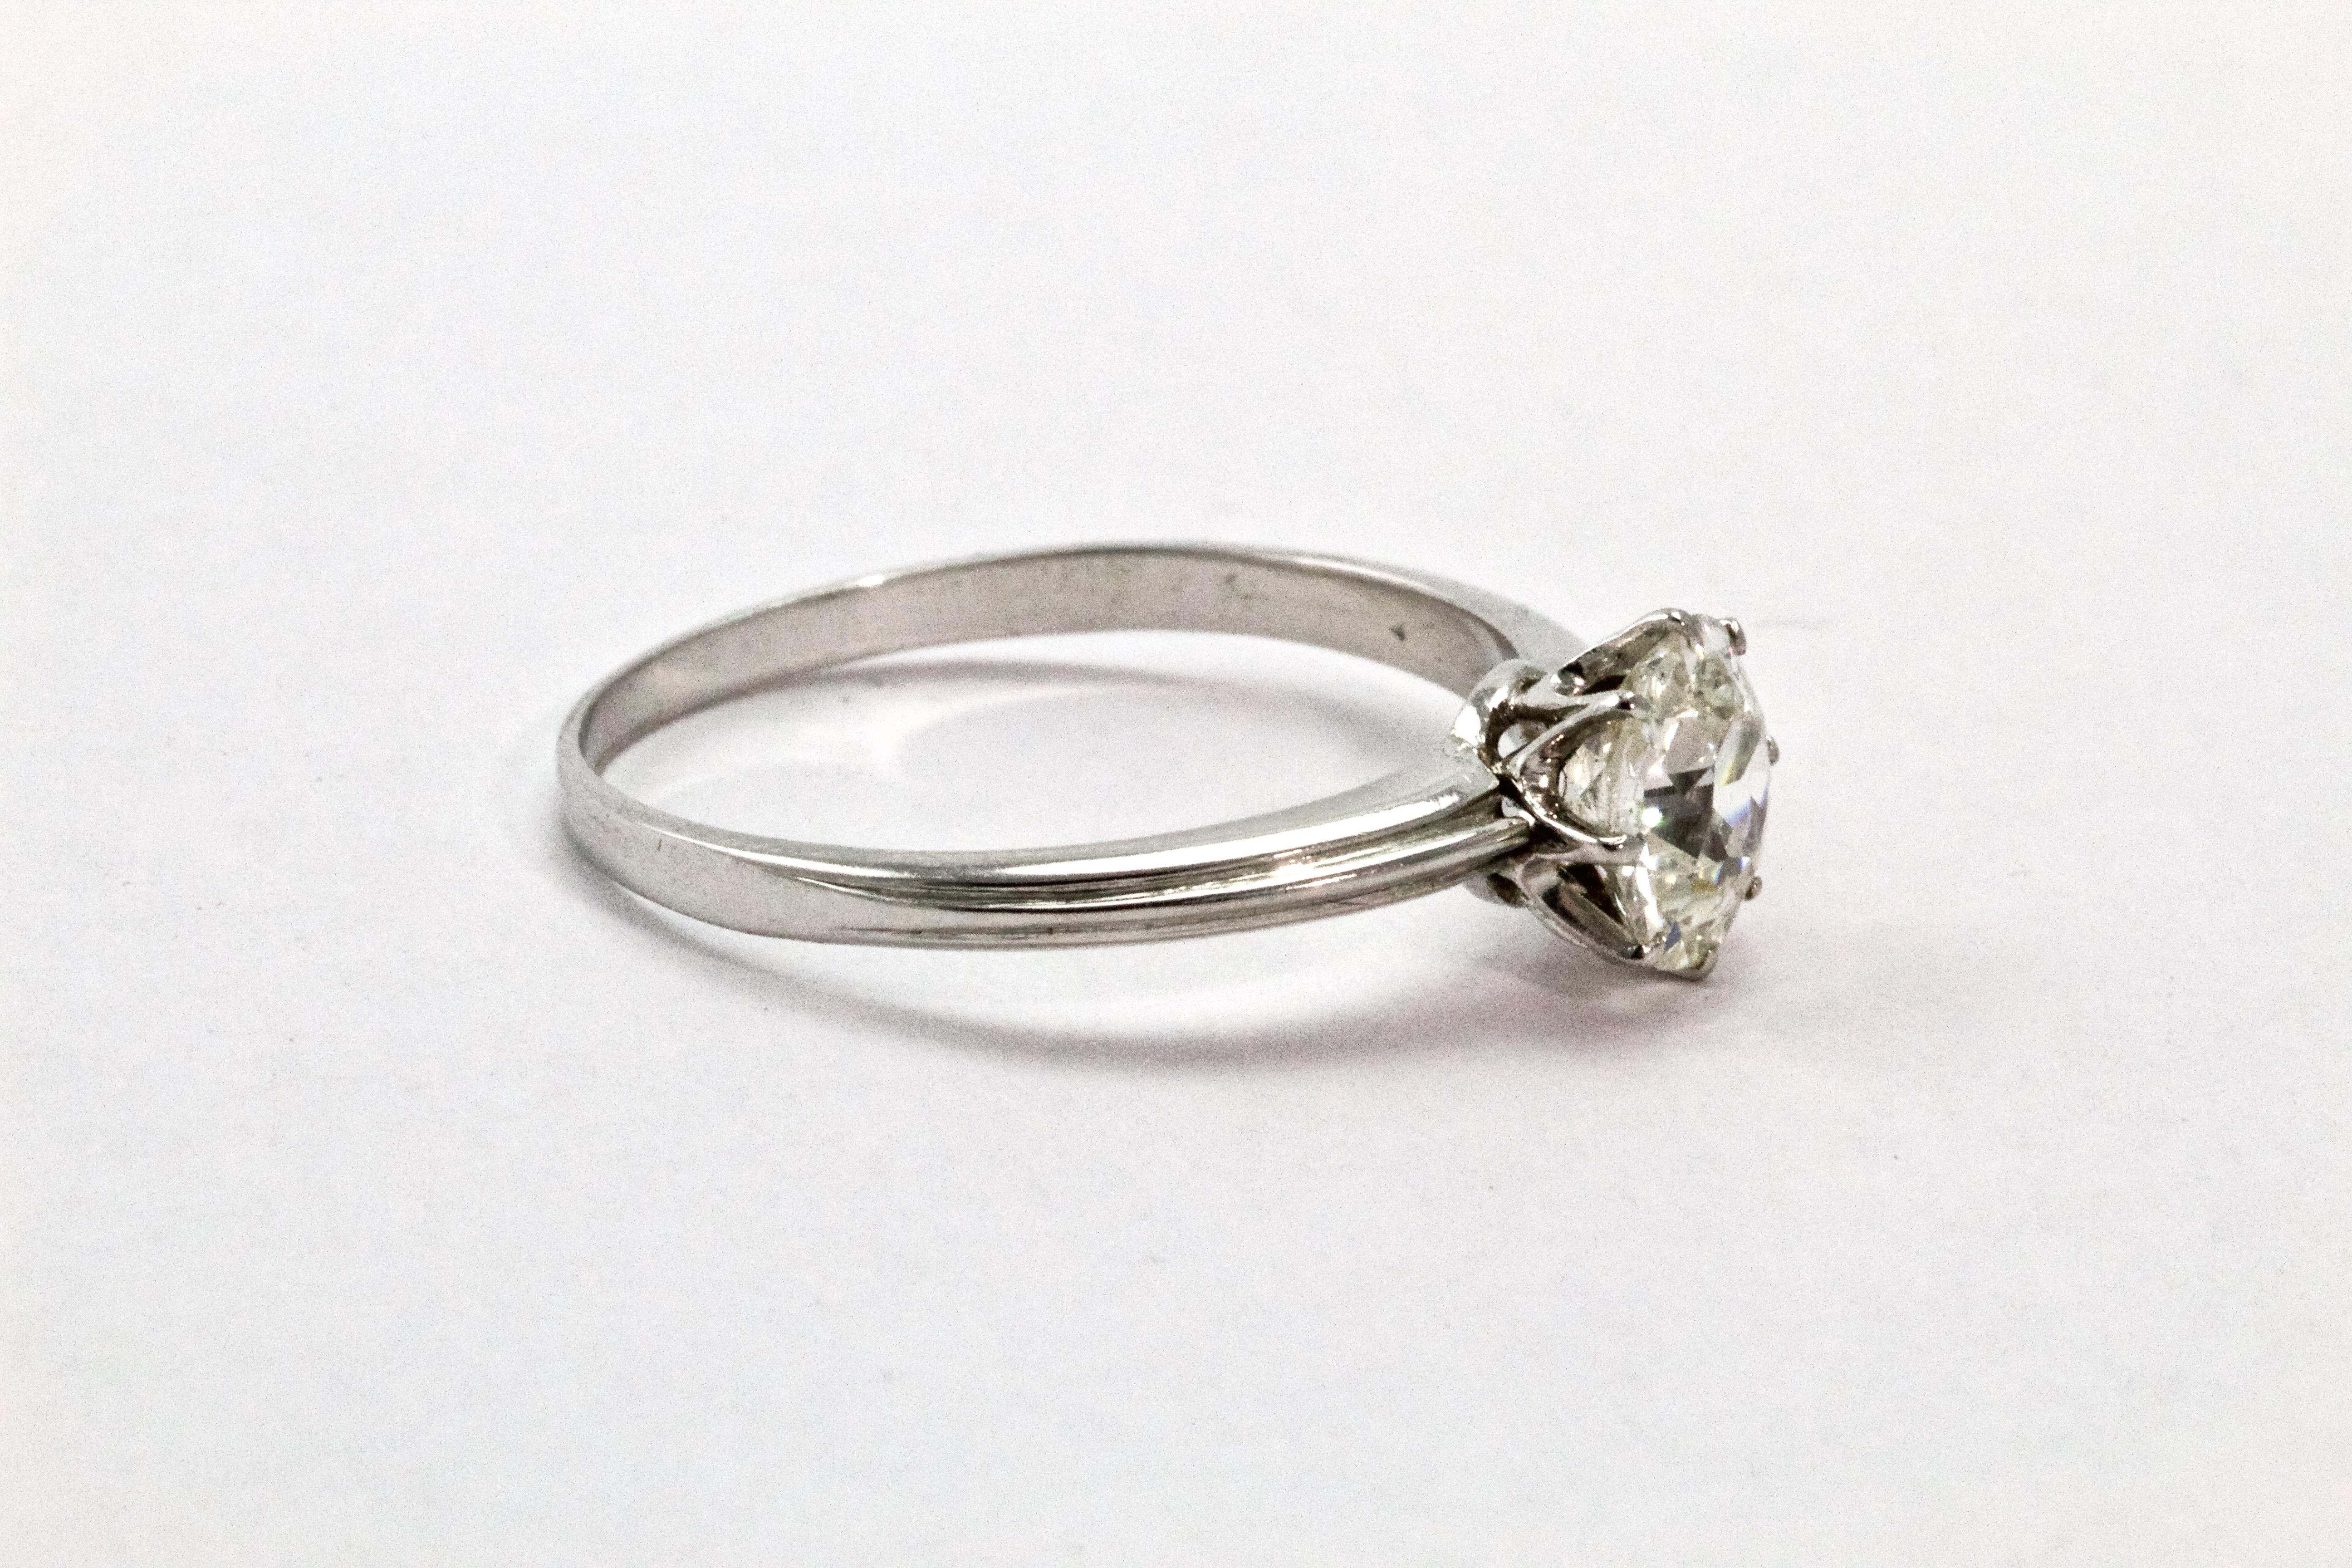 This classic and stunning diamond solitaire ring dates back to the 1920s, and is expertly made. The stone is 1.02 carats. The Old European cut diamond (H - VS2) is beautifully claw set within a wonderfully hand made collet, which features a simple